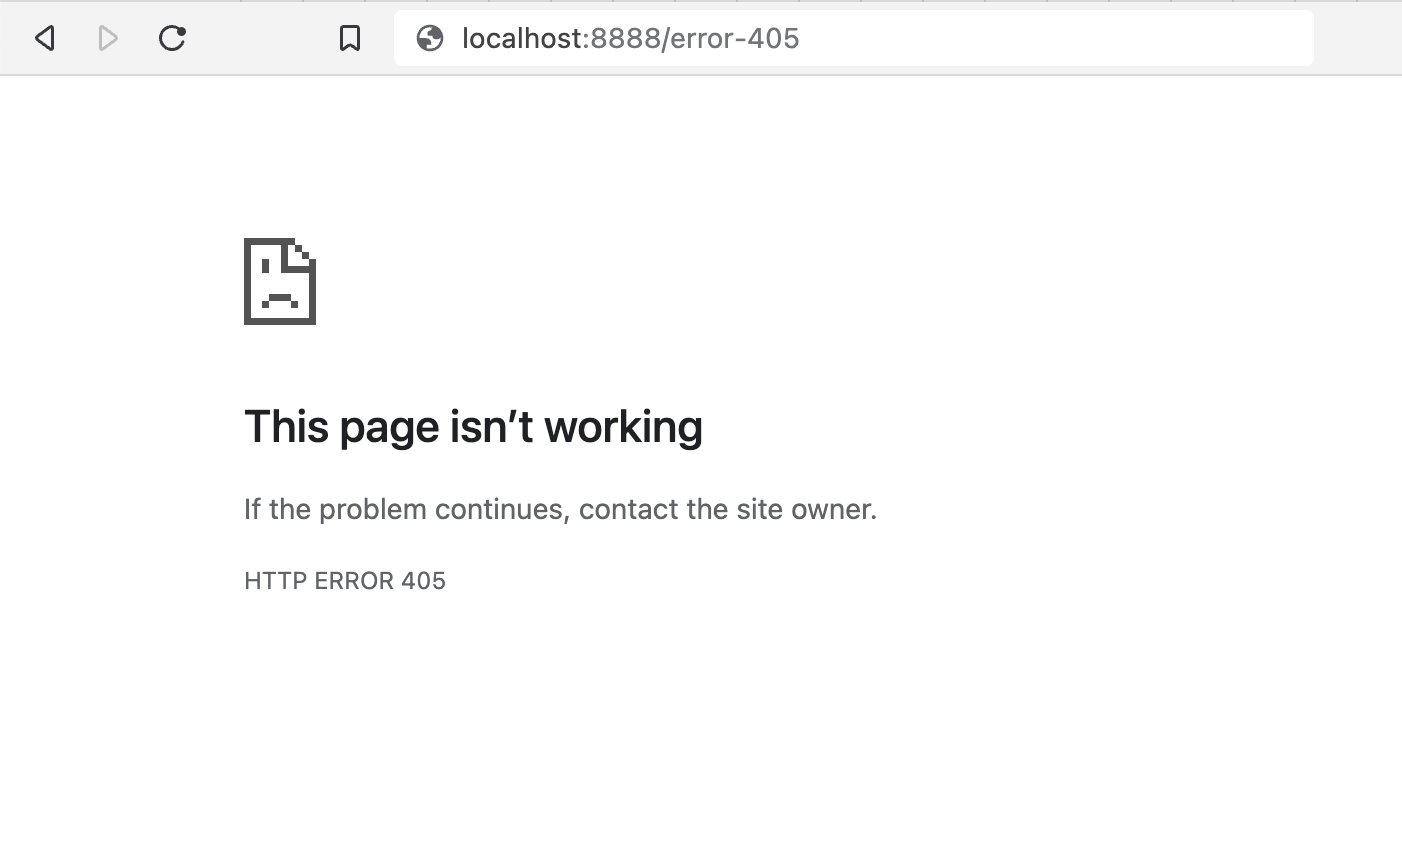 This page isn't working, if the problem continues, contact the site owner. HTTP ERROR 405